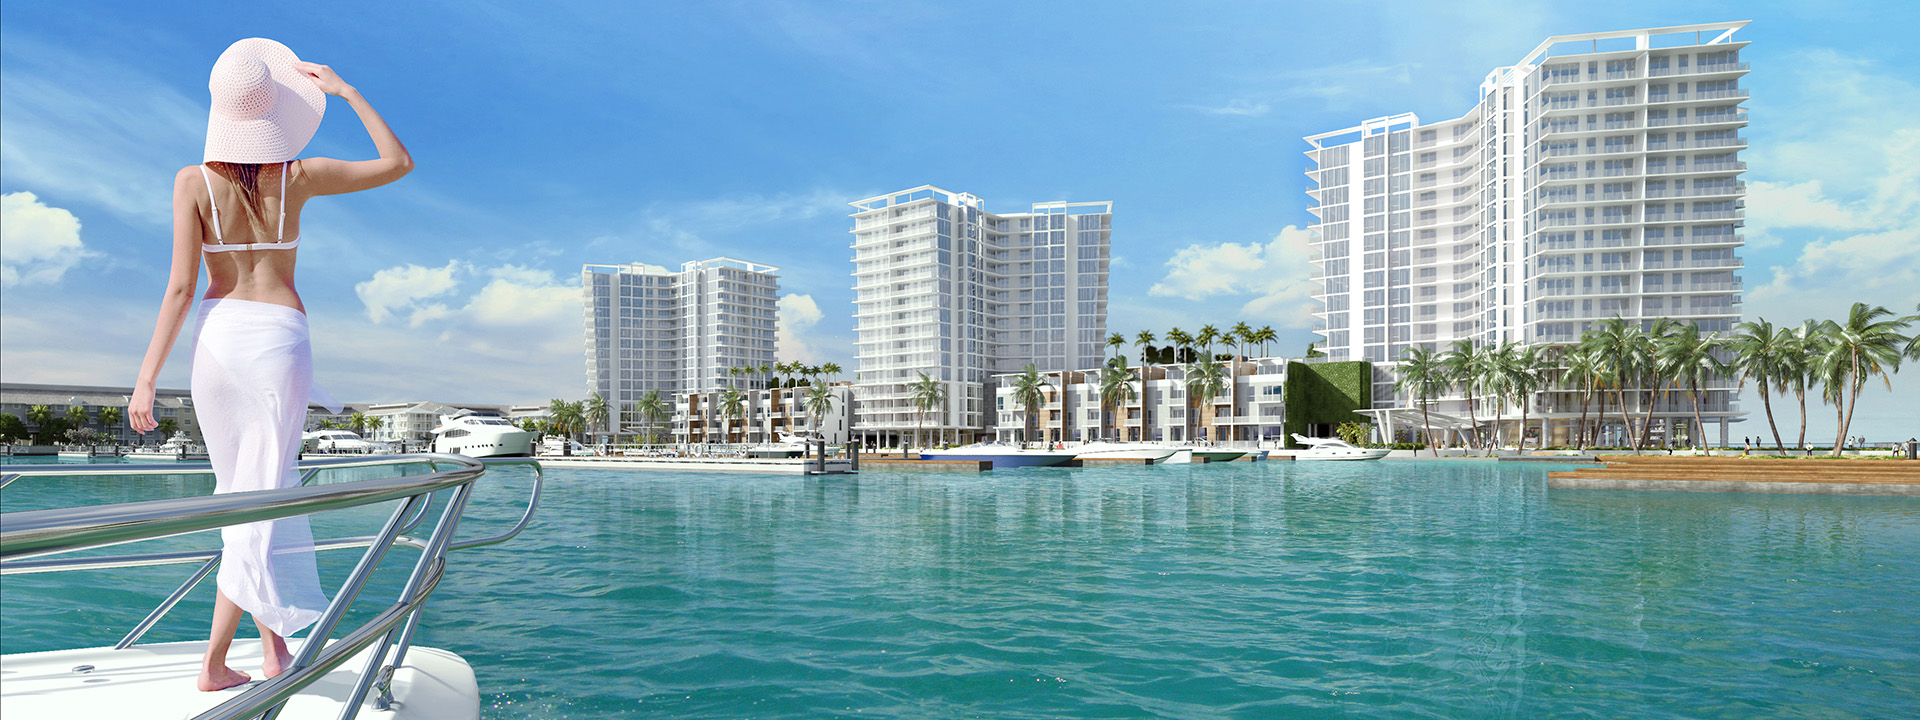 Related Group launches presales for second phase of Ritz-Carlton Residences